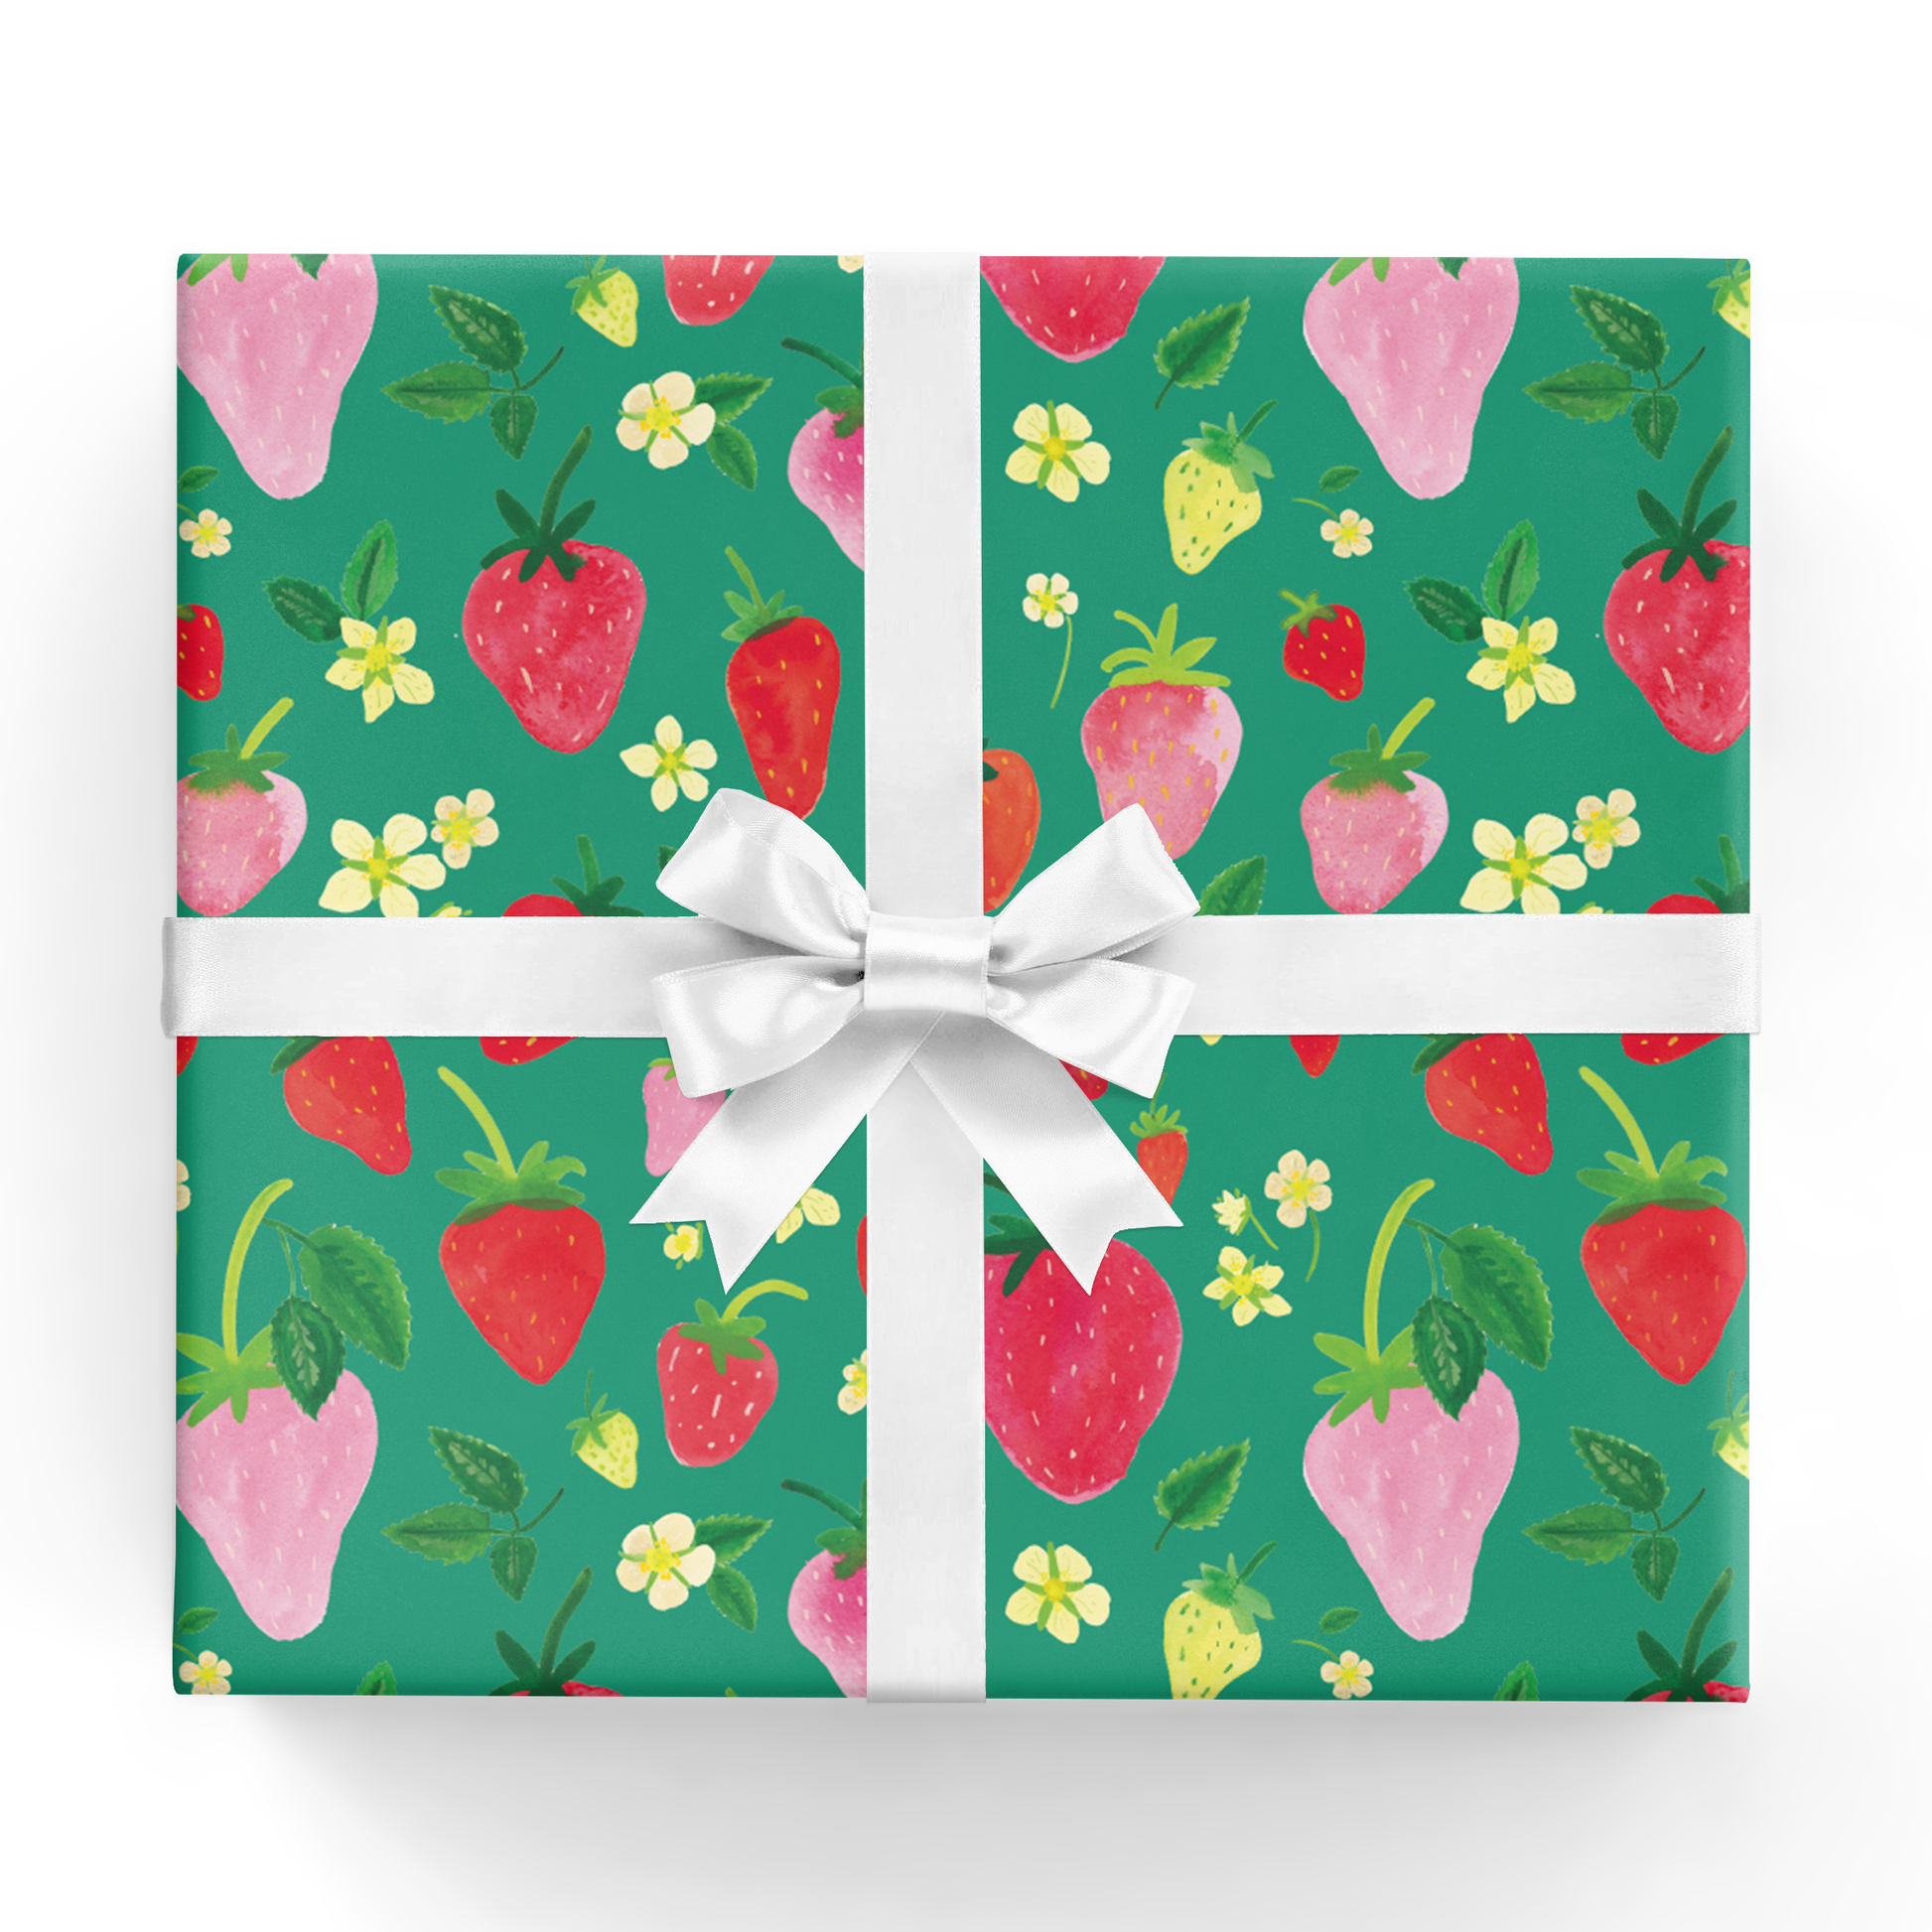 Green sheet of wrapping paper with pink and red strawberries and small yellow flowers on it 